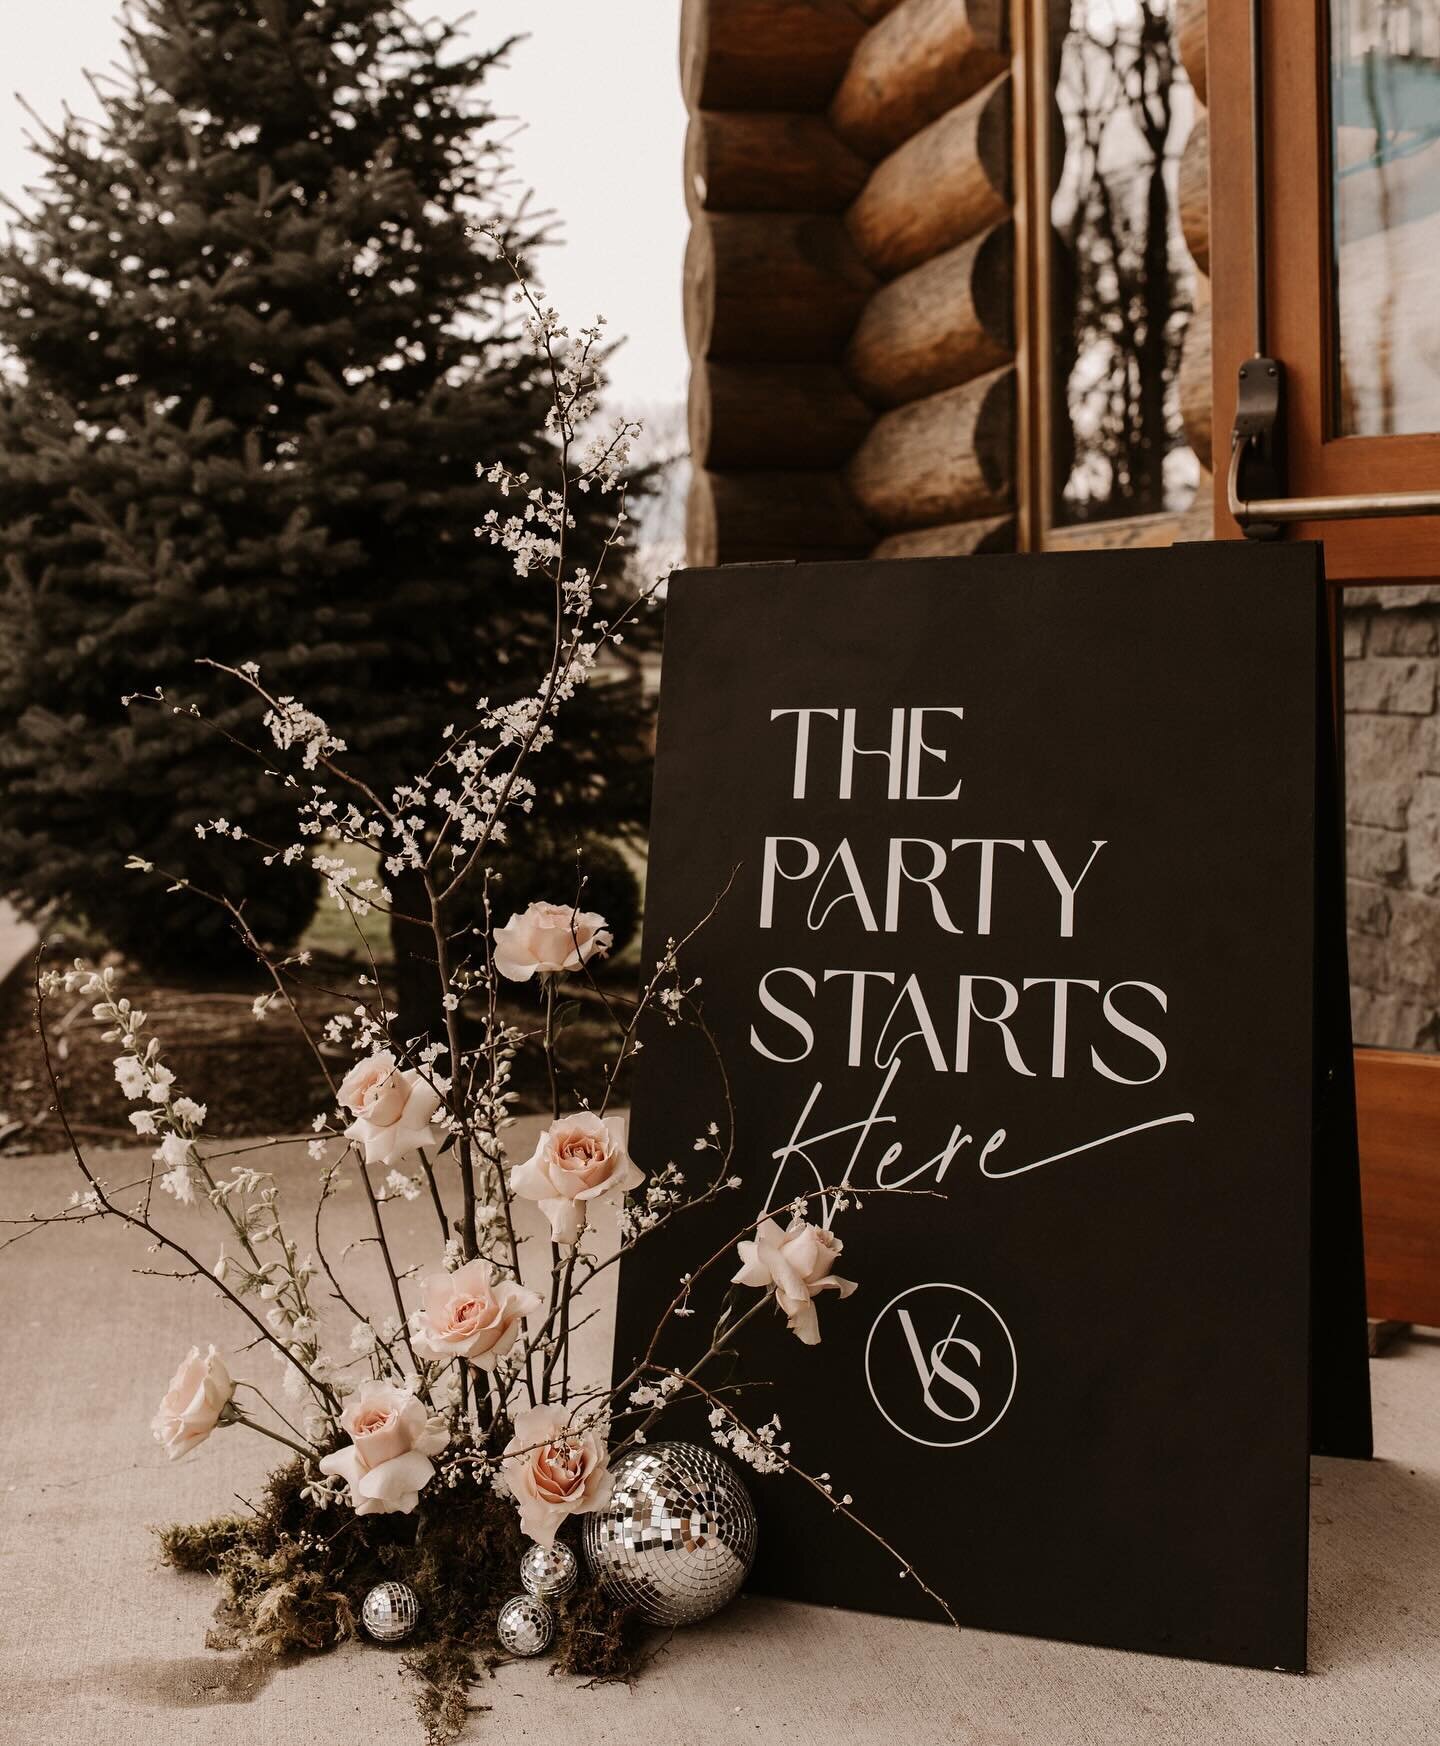 Had the BEST night at @vendor.society &lsquo;s opening party! Proud to have played a small part in decorating this stunning event 🪩💕

Wooden A-frame &amp; Bar Signage: @studio.sanchez 
Planning, Styling, &amp; Design: @vendor.society  @bubblybridep